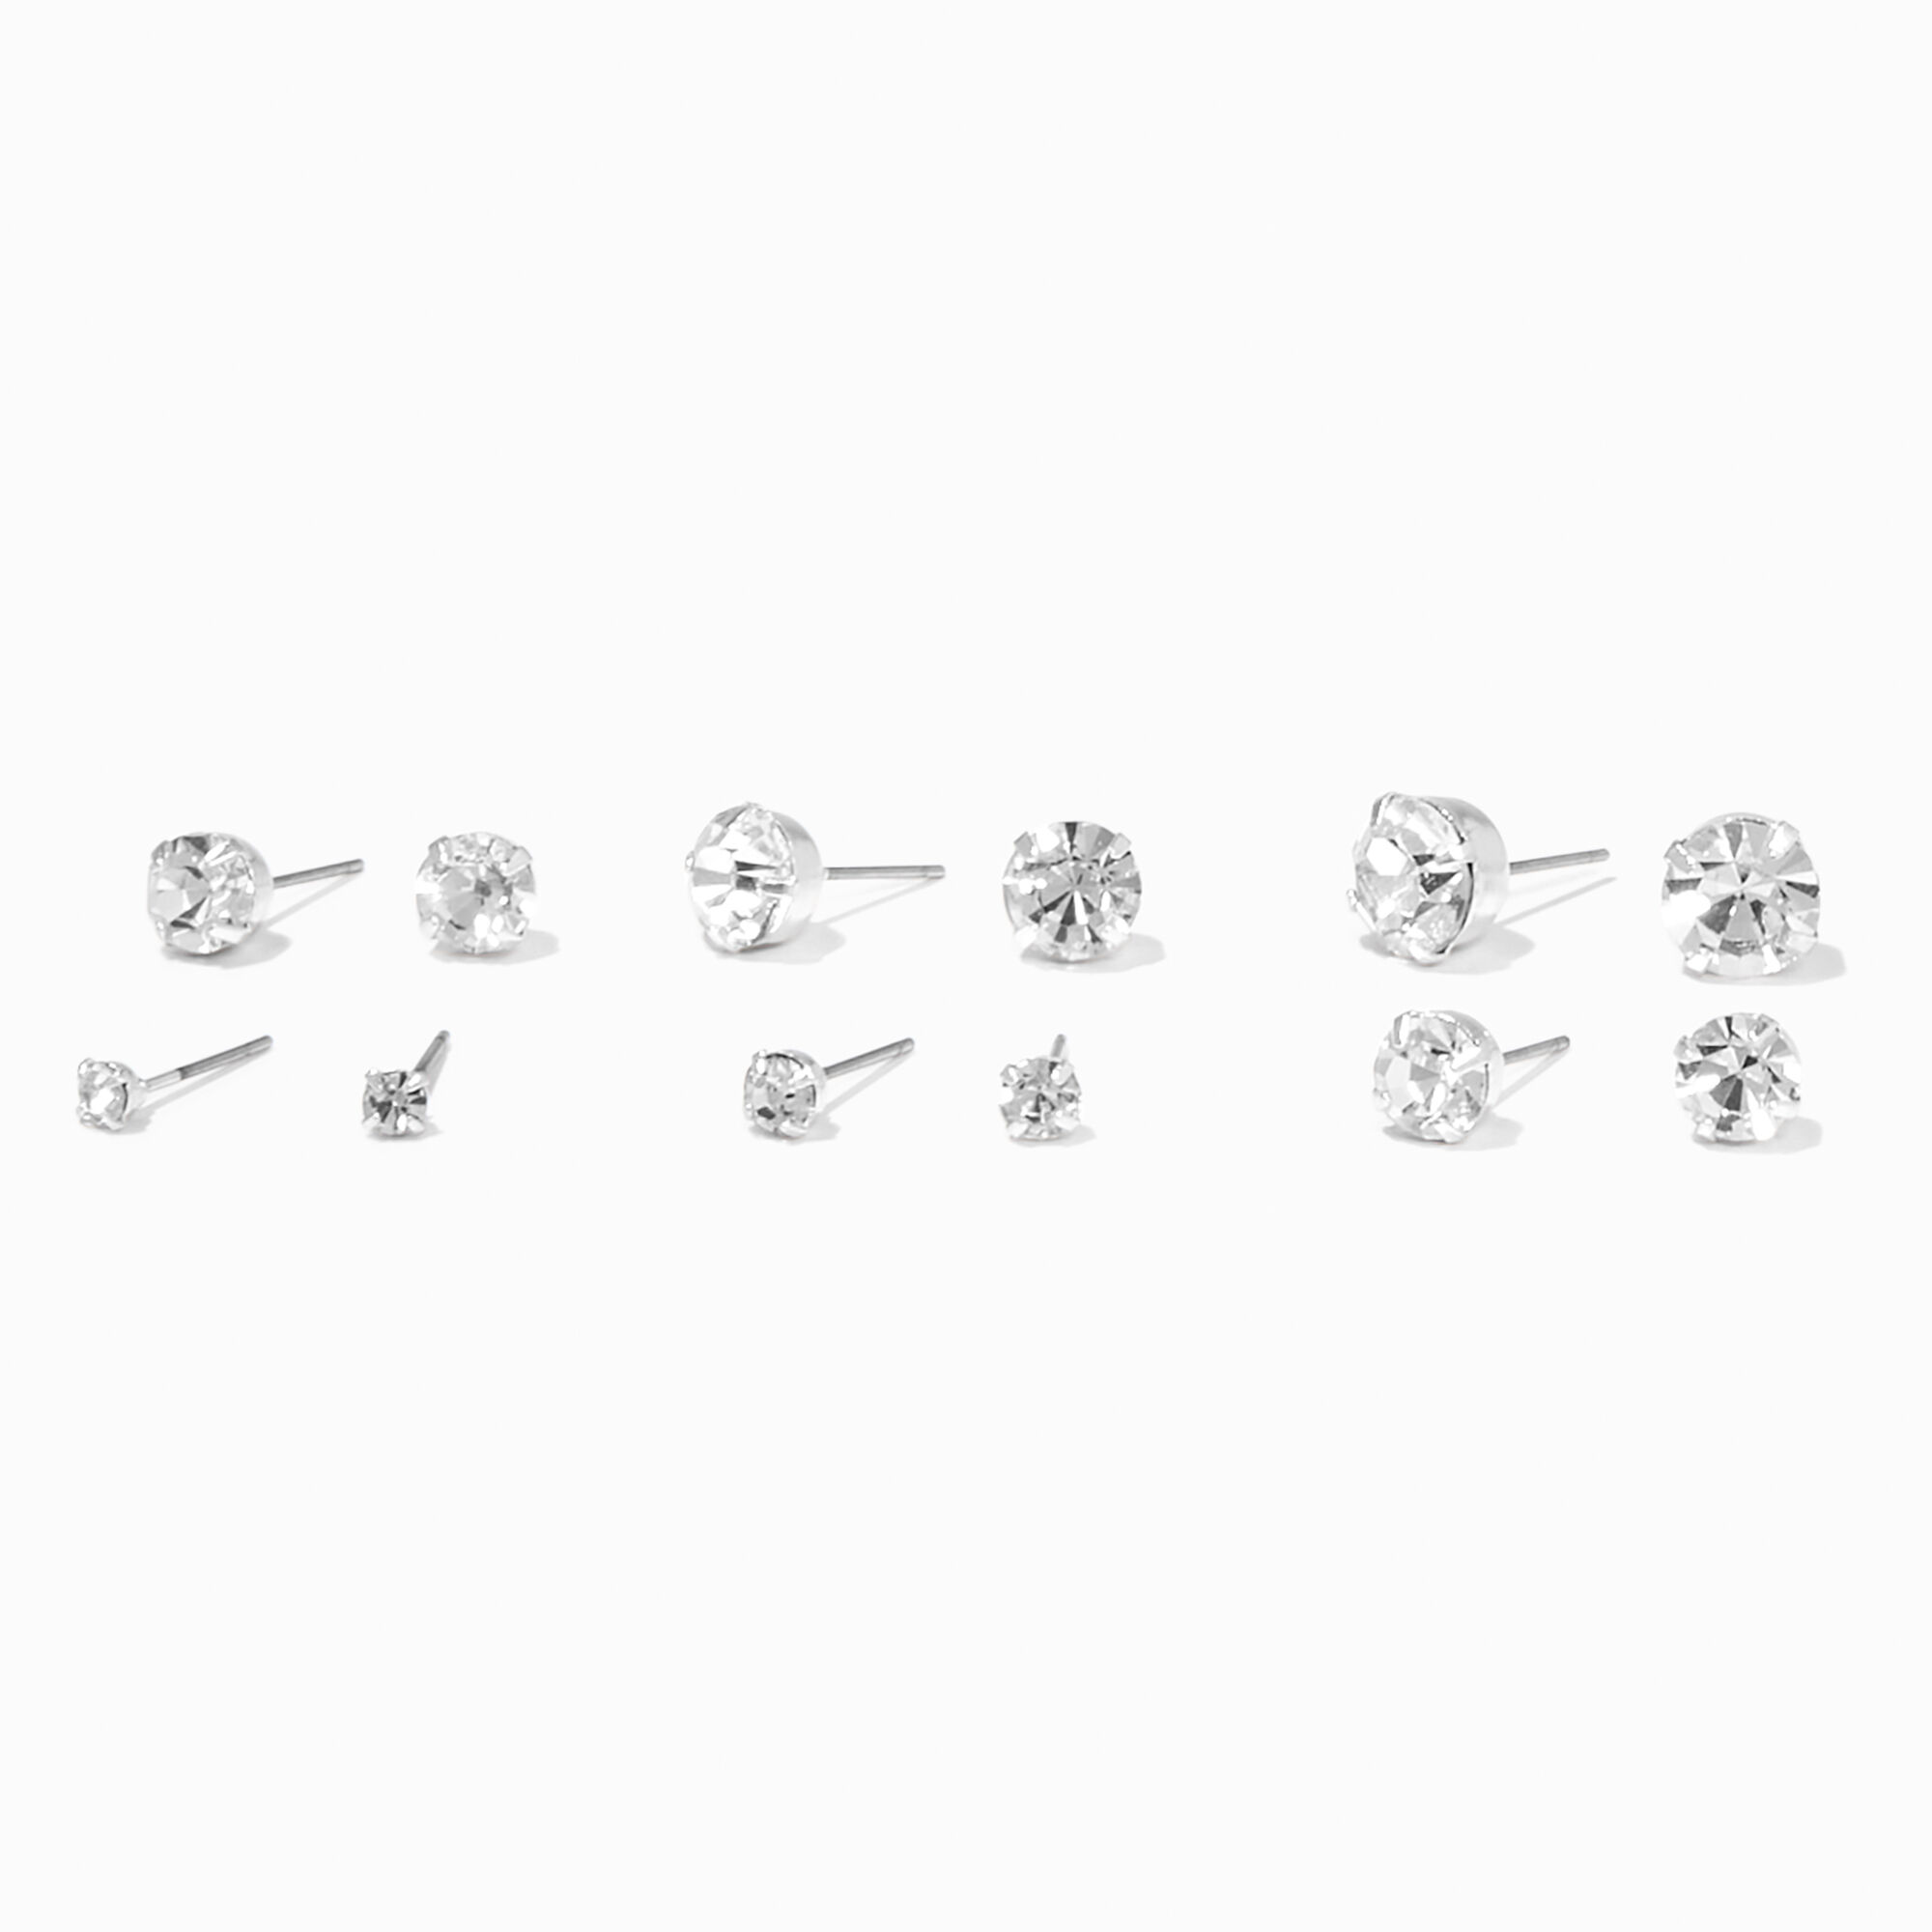 View Claires Embellished Graduated Round Stud Earrings 6 Pack Silver information